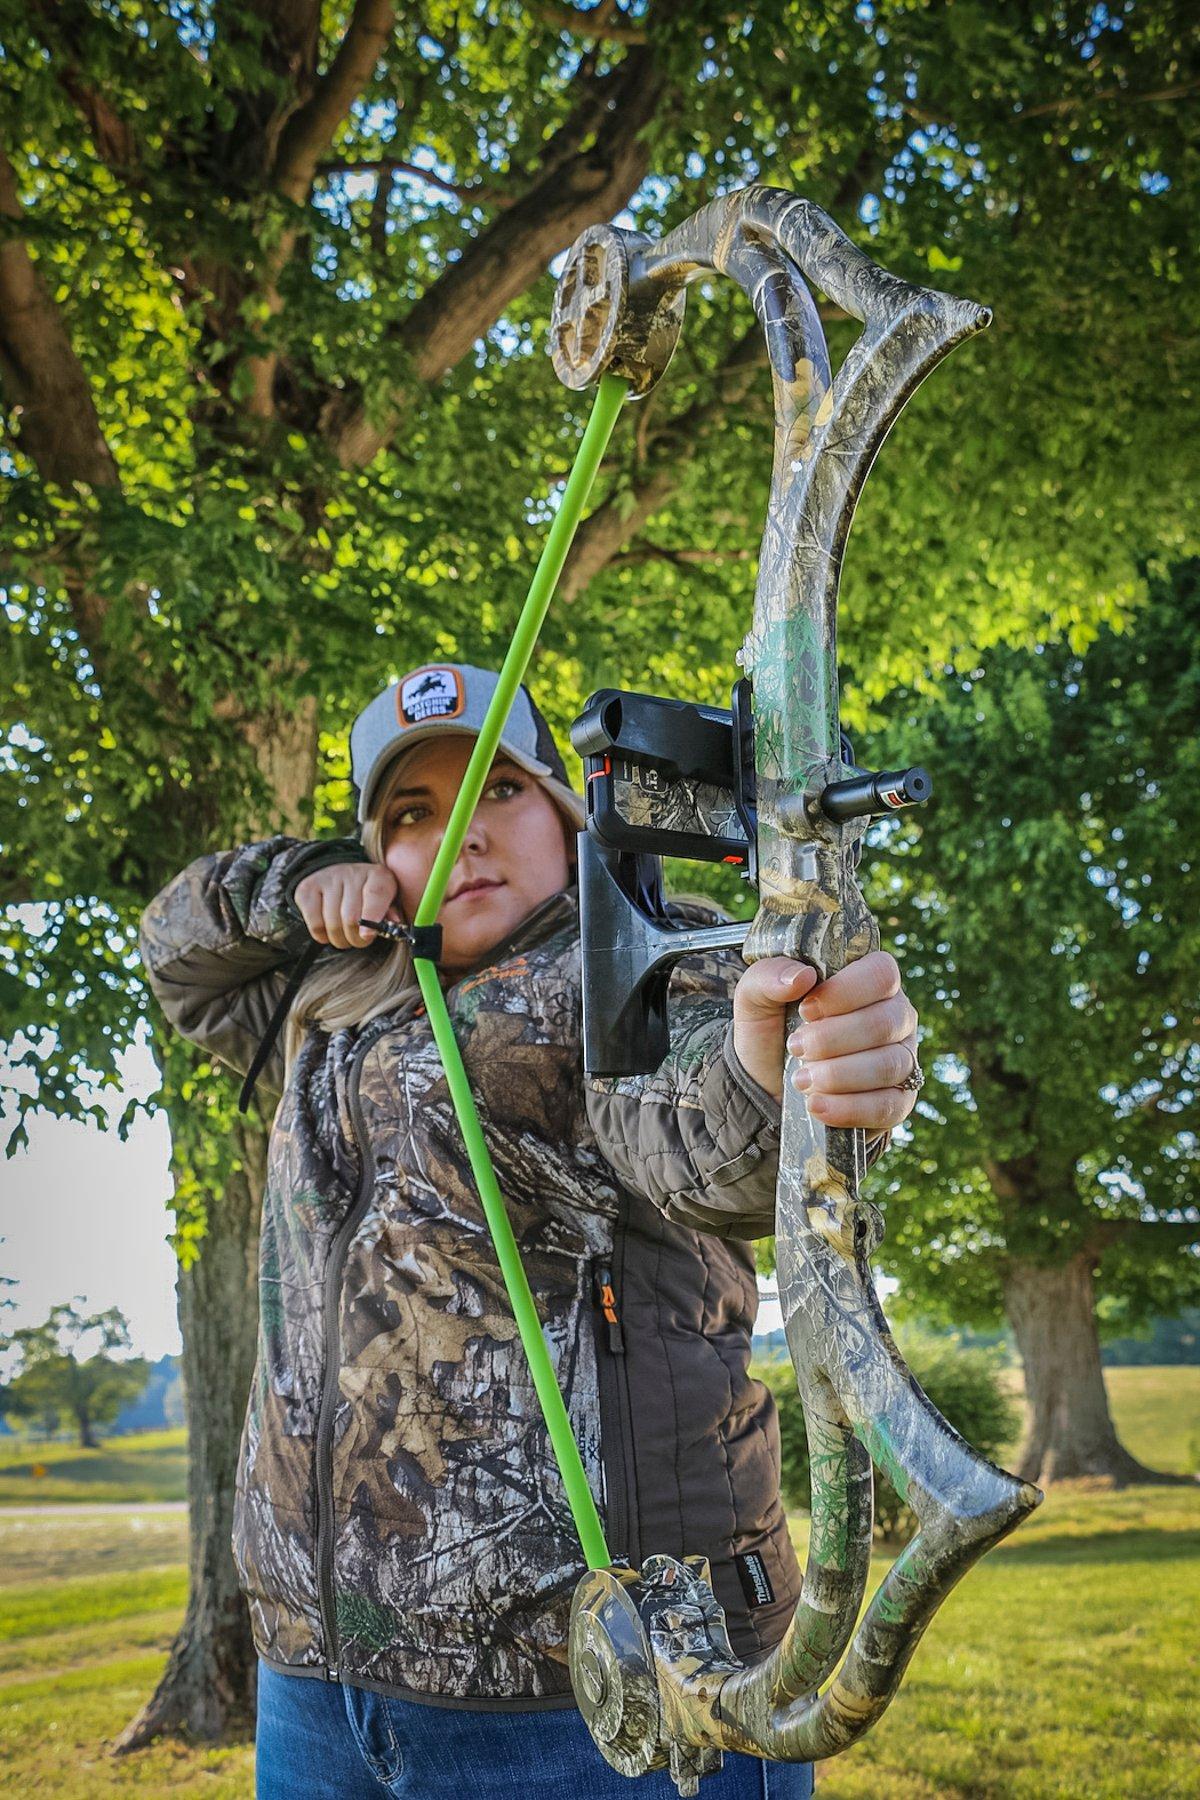 The AccuBow is decidedly appropriate for those who suffer from target panic. It improves your focus and form and reduces the anticipation that comes with firing arrows. (Josh Honeycutt photo)